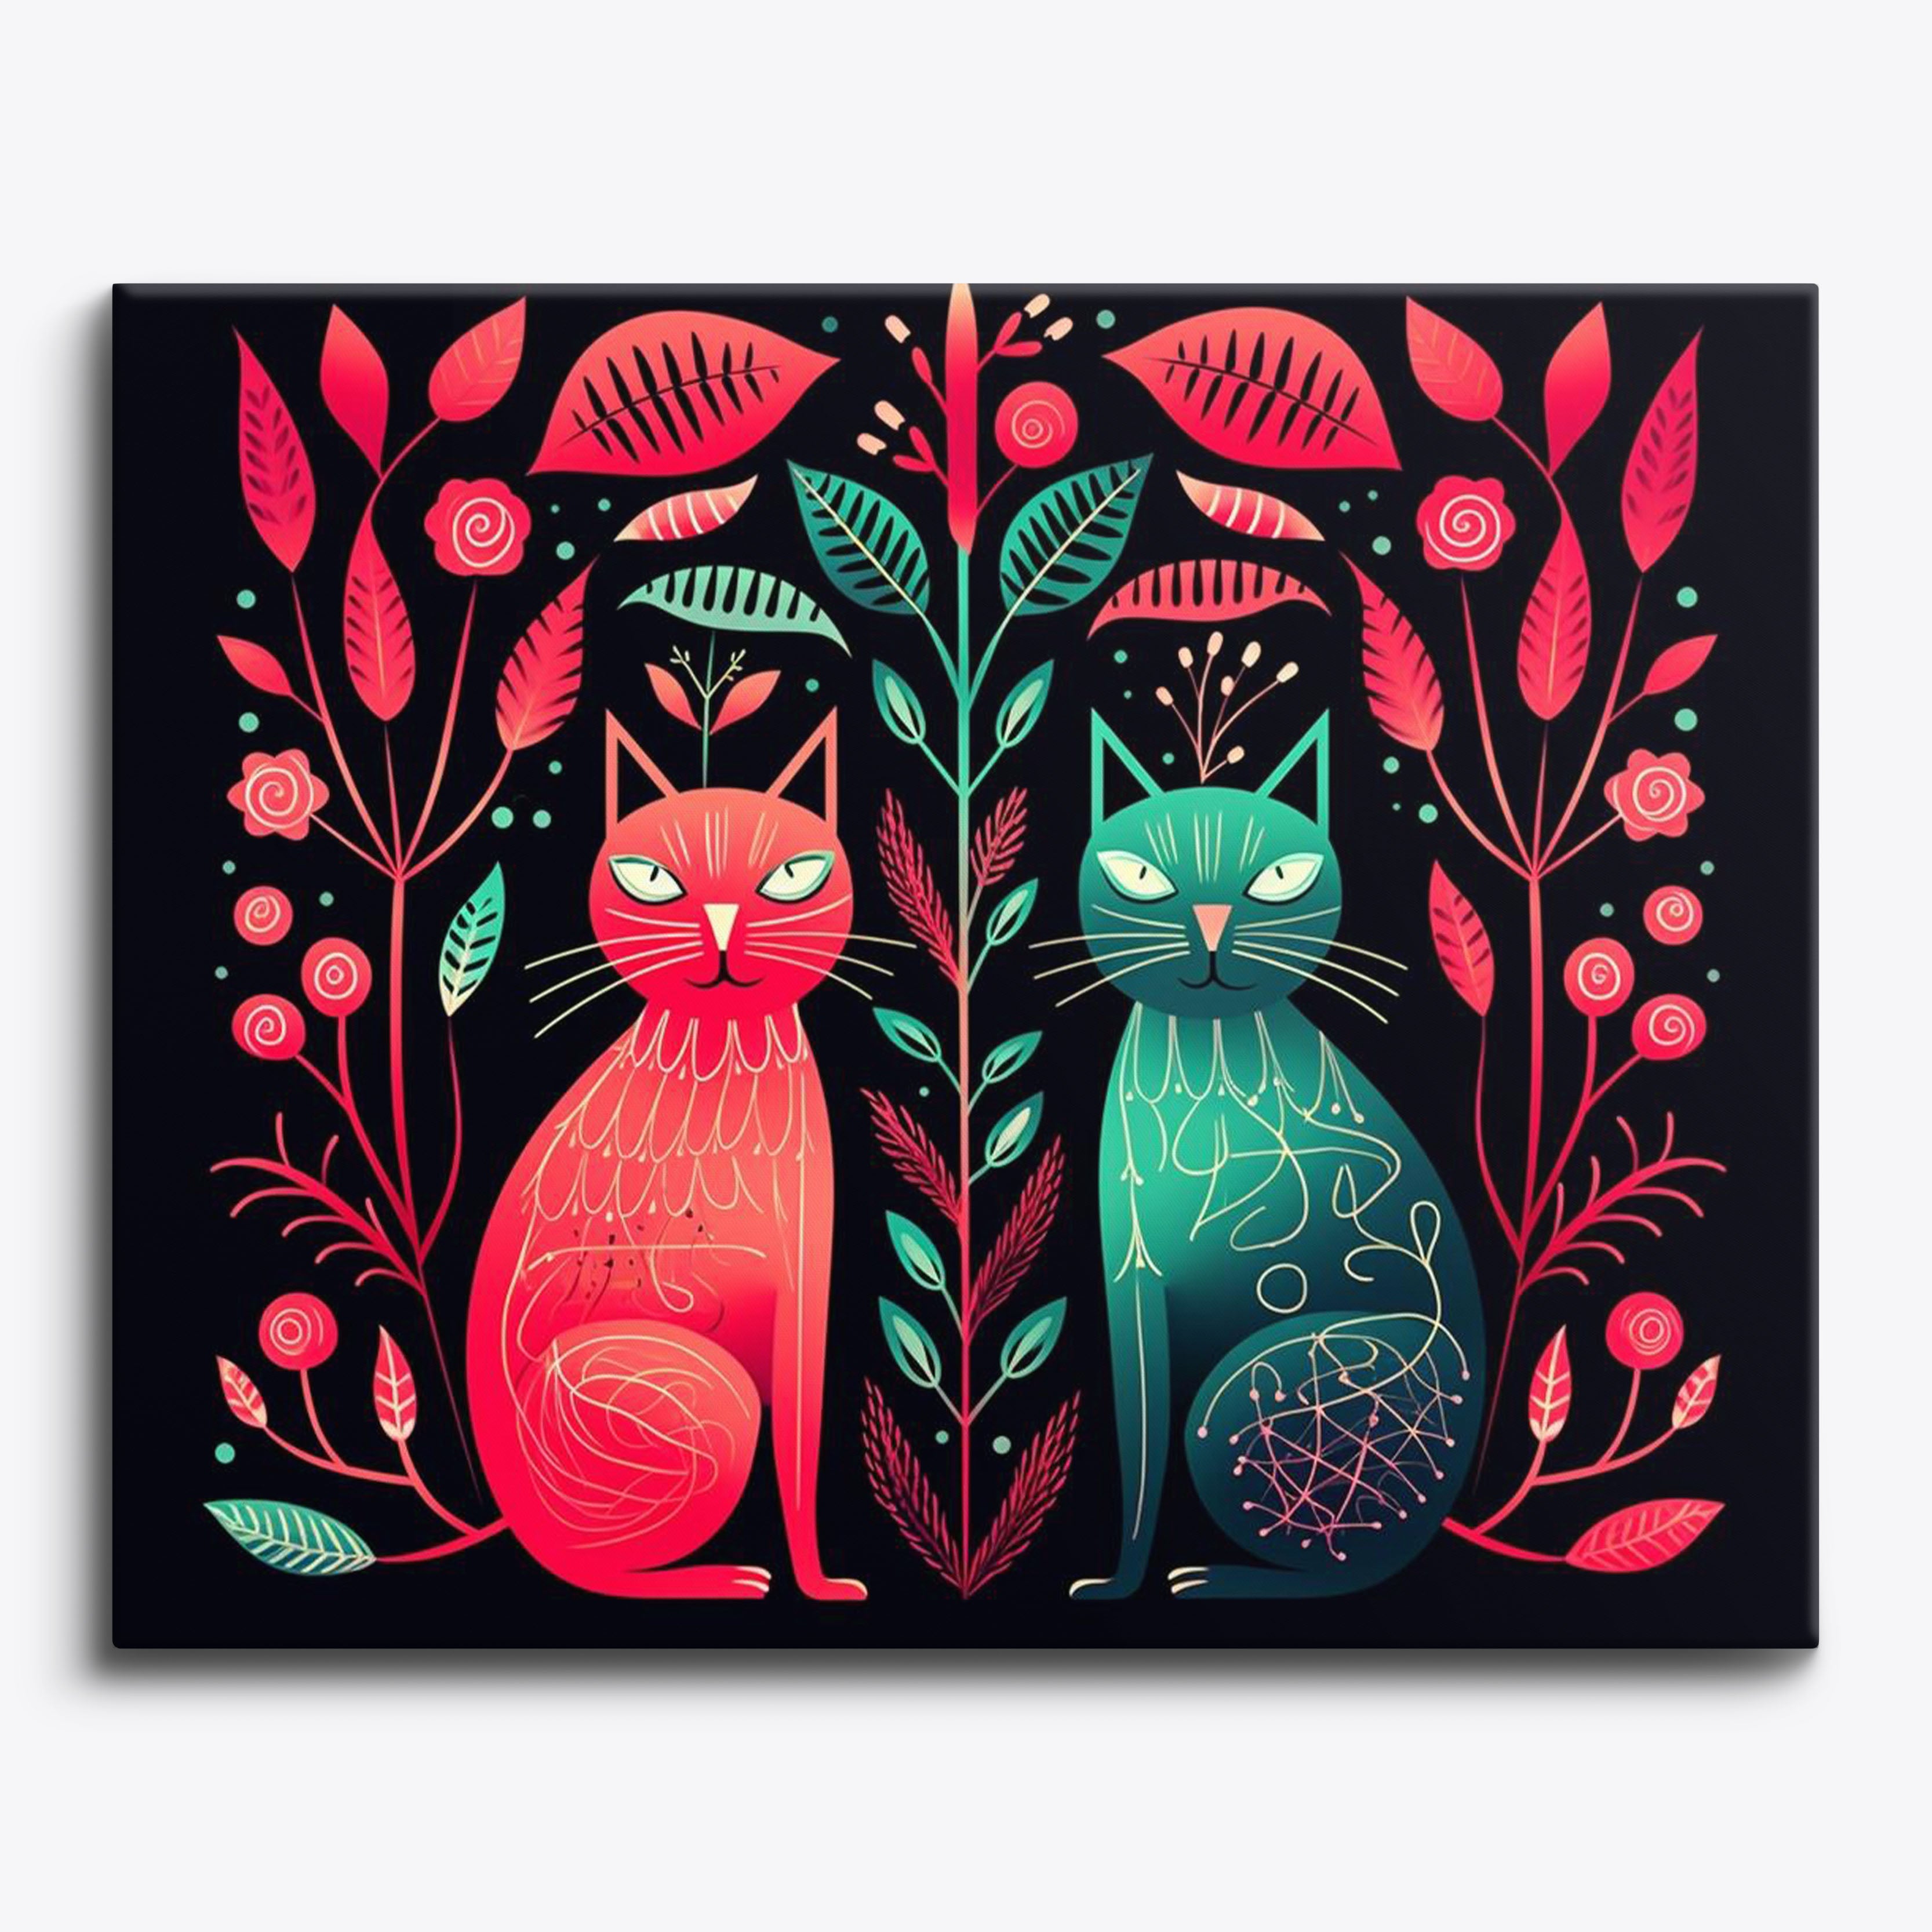 Folklore Cats No Frame / 24 colors